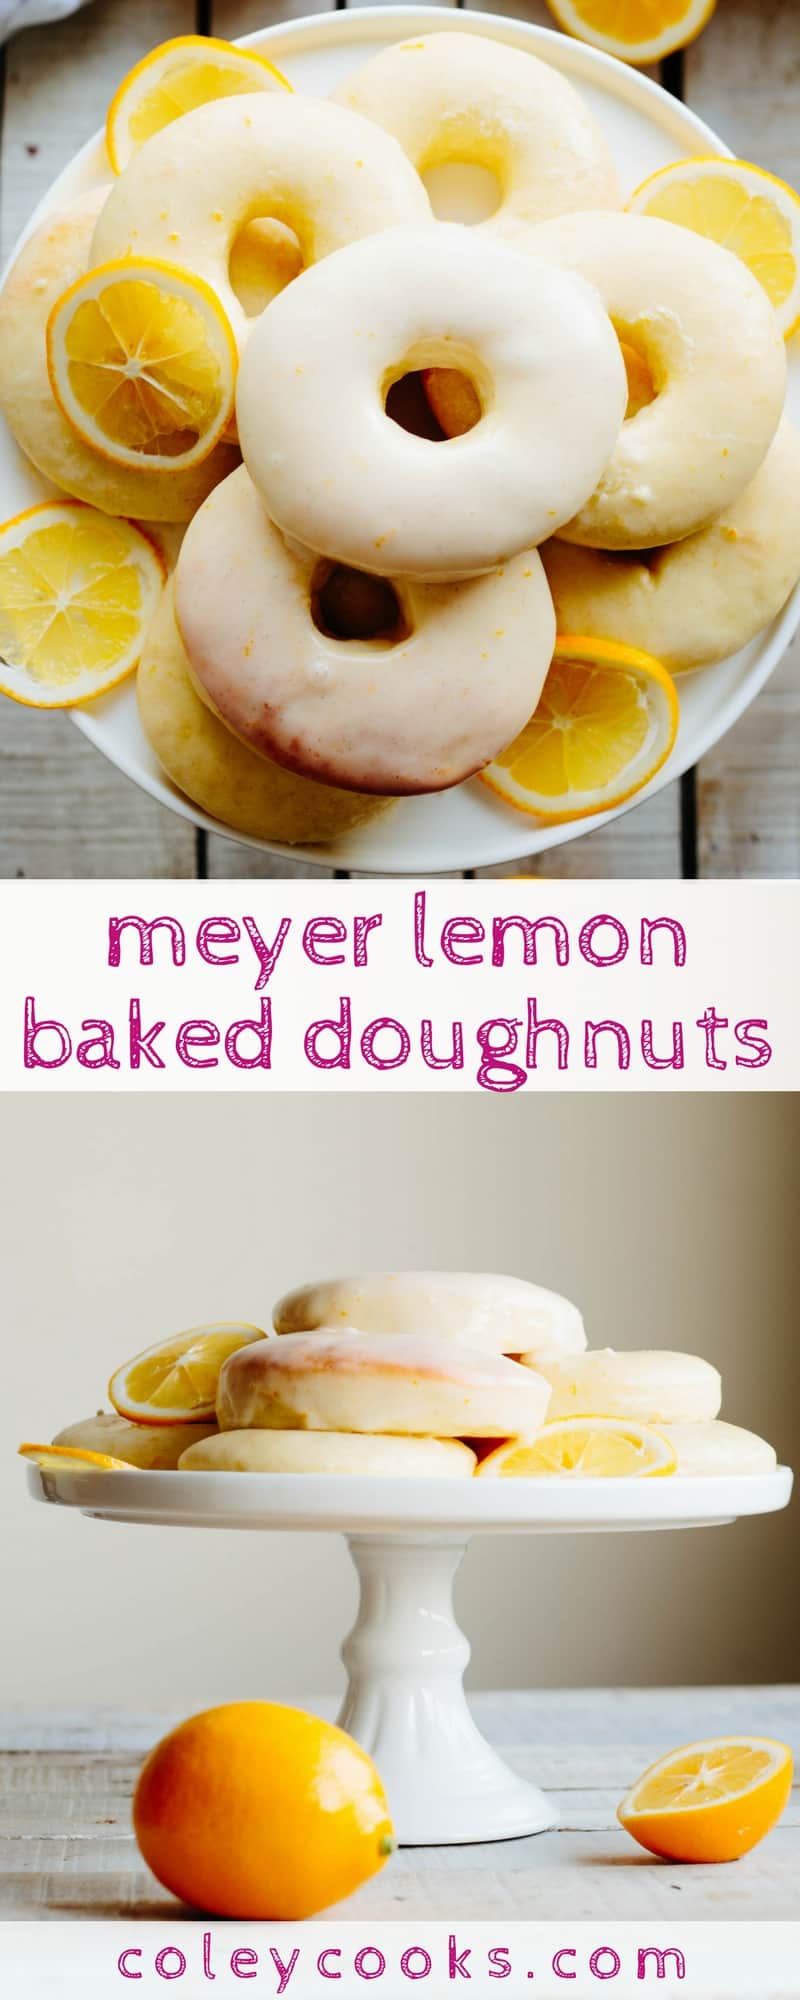 MEYER LEMON BAKED DOUGHNUTS | Easy recipe for yeasted baked doughnuts with Meyer lemon glaze! Perfect for a lazy weekend breakfast or brunch, bridal showers and baby showers! | ColeyCooks.com